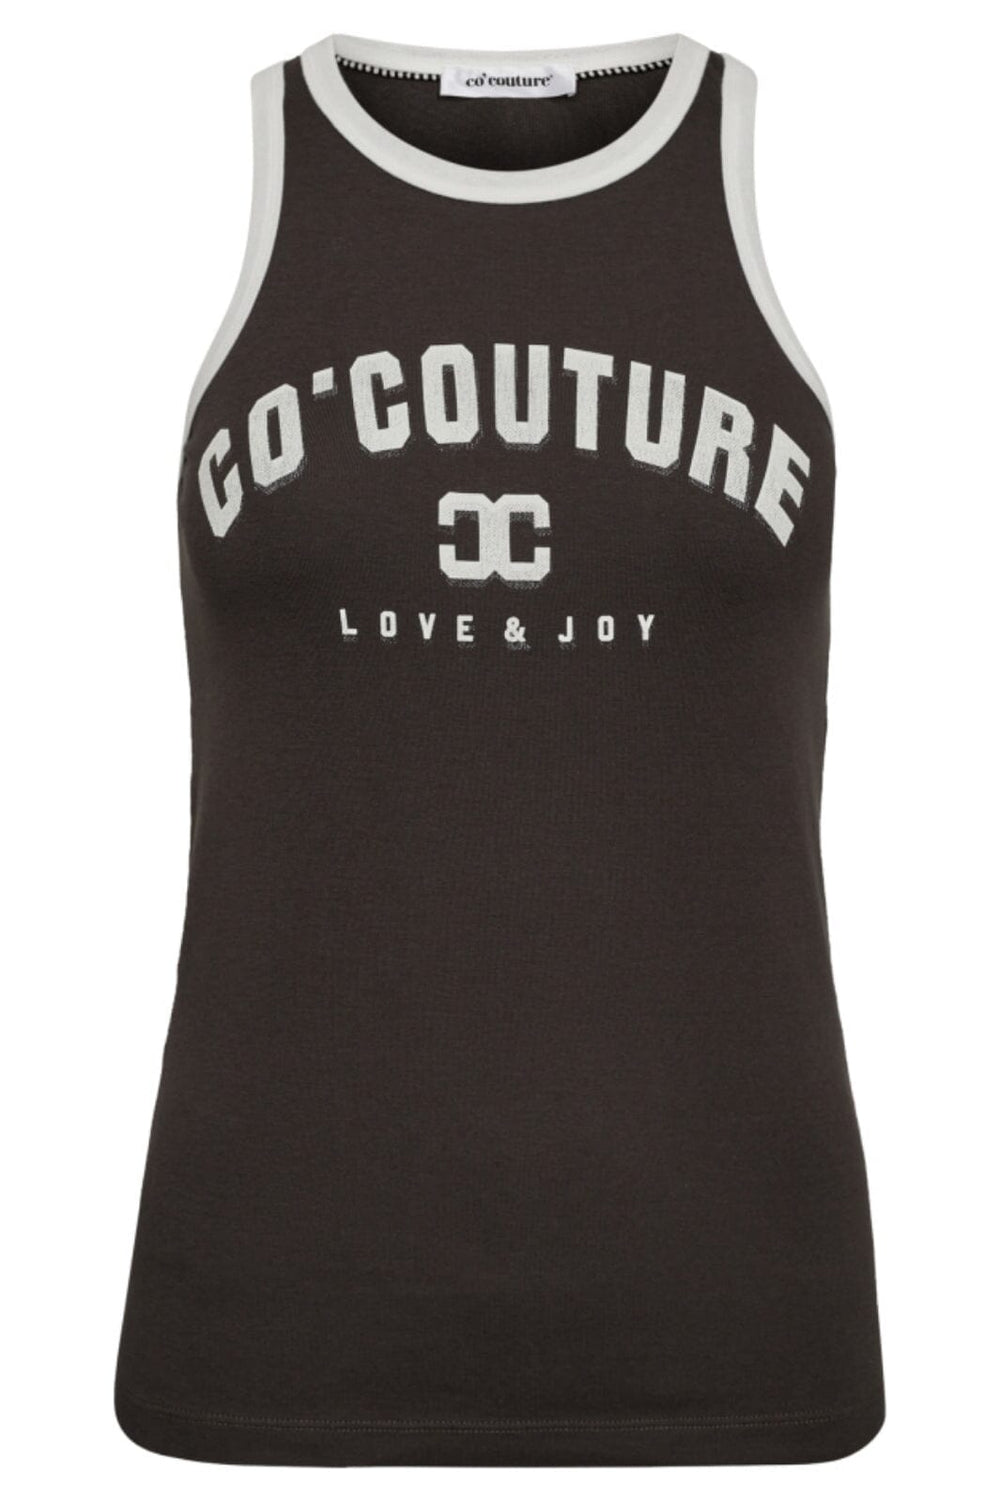 Co´couture - Edgecc Tank Top 33081 - 156 Antracit T-shirts 